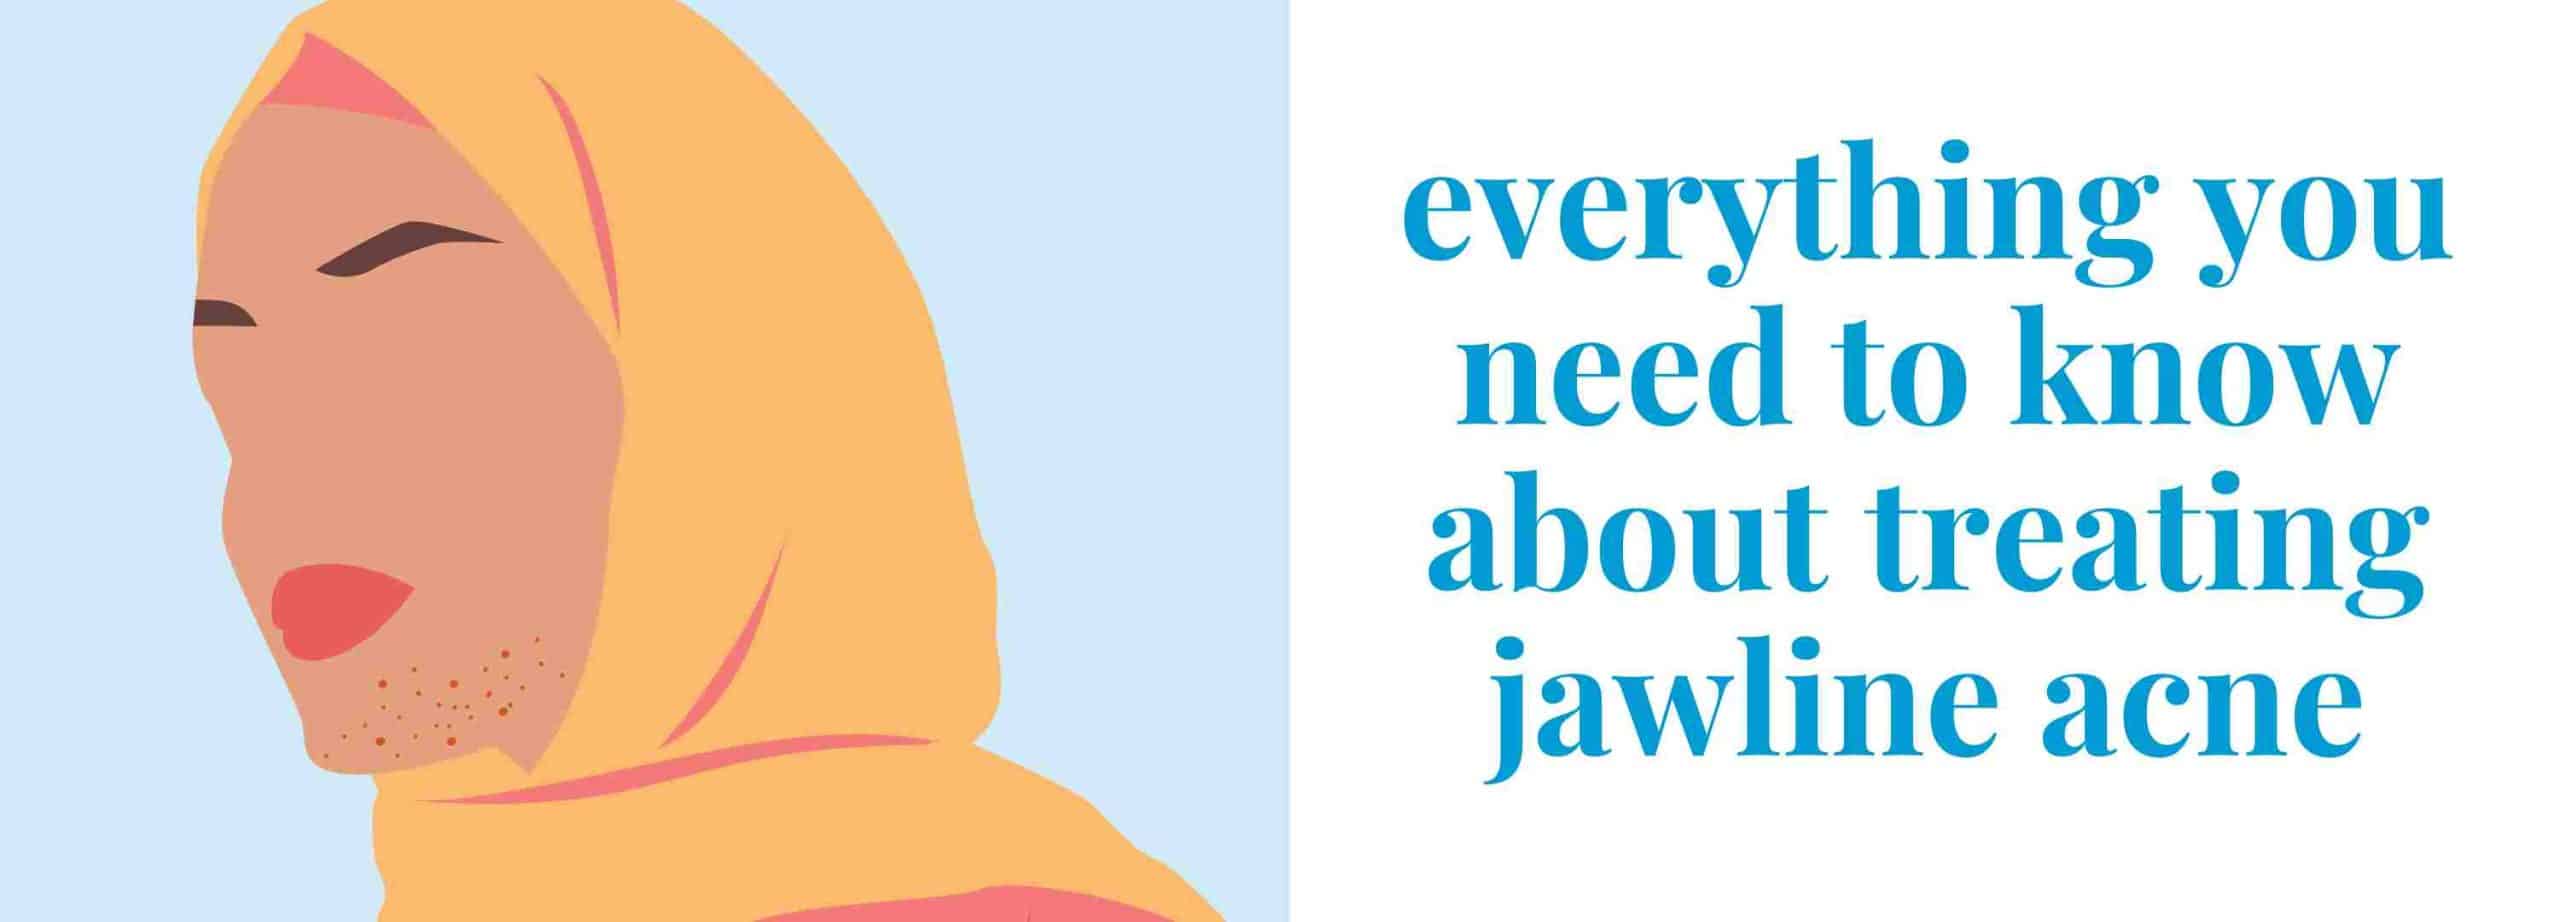 Everything you need to know about treating jawline acne